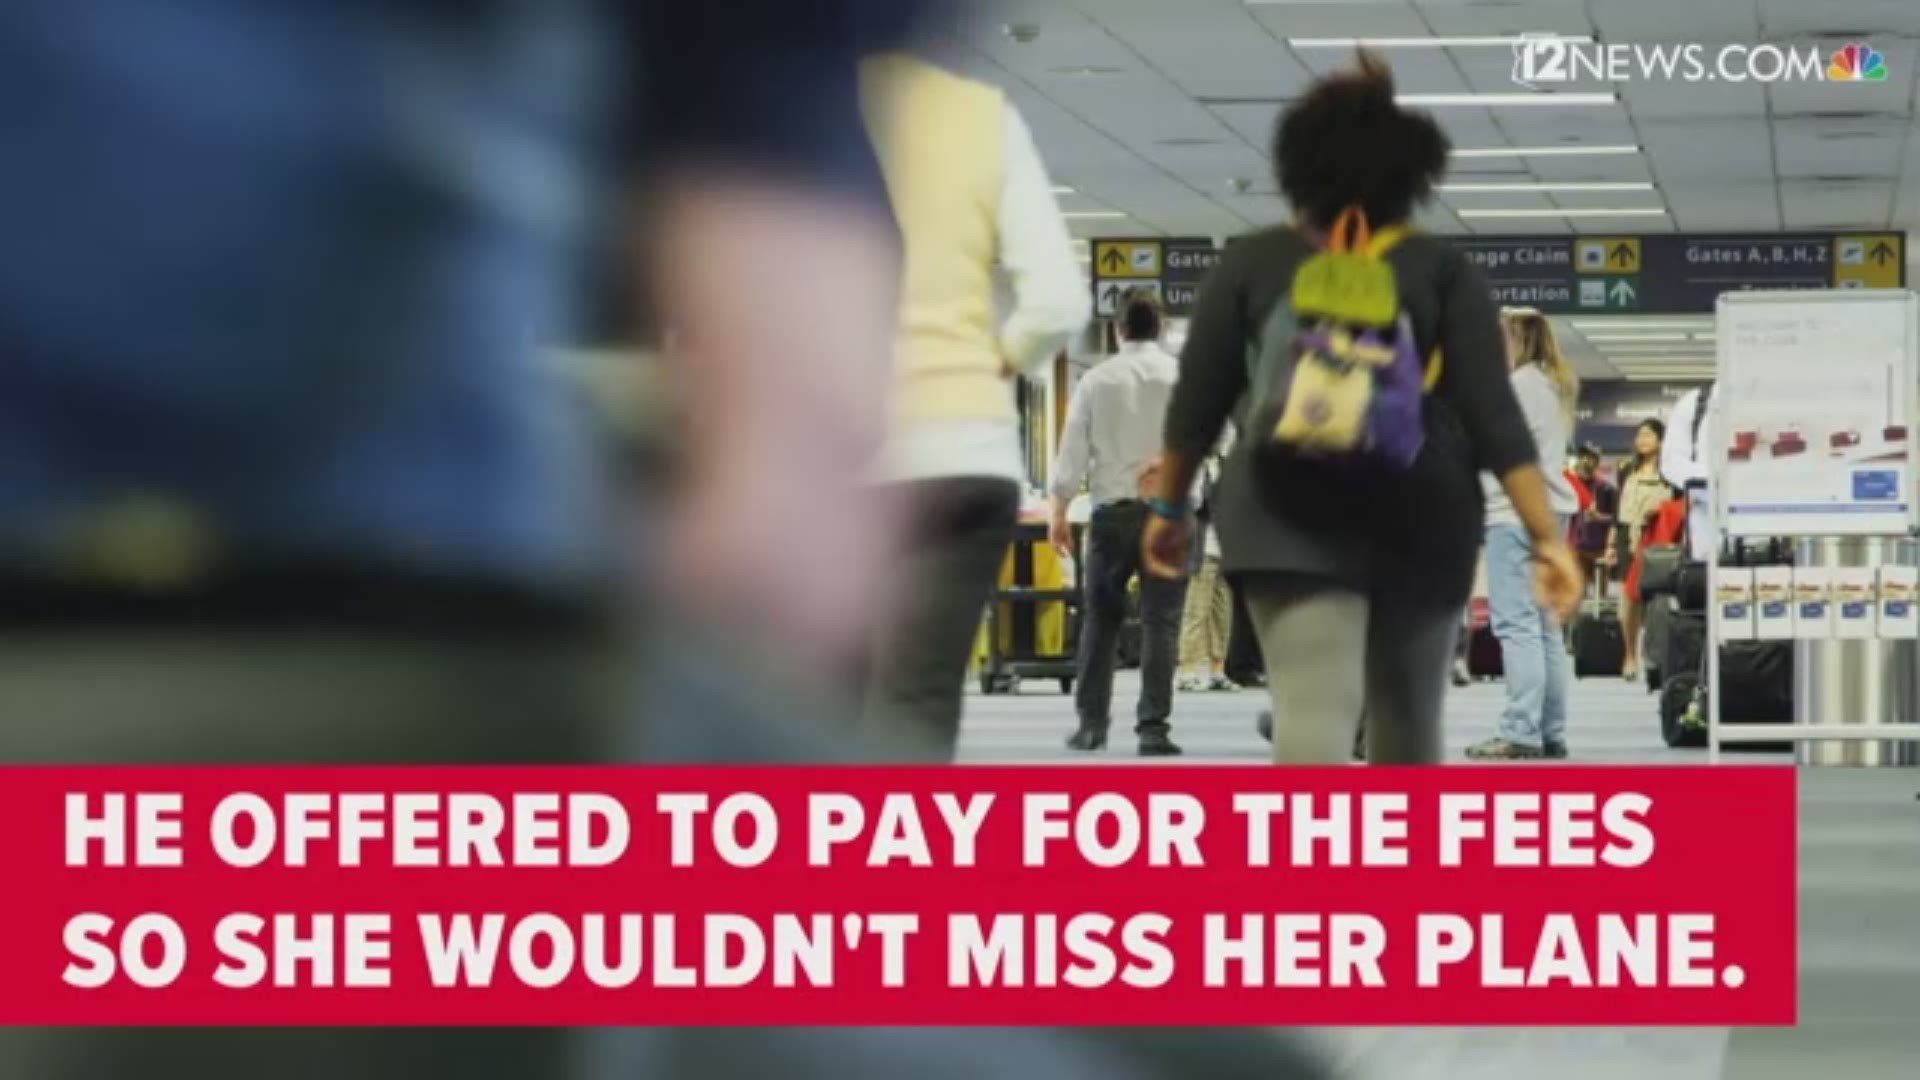 After finding out that she was unable to pay for an unexpected baggage fee, a former ASU student received an assist from Cardinals tight end Jermaine Gresham.